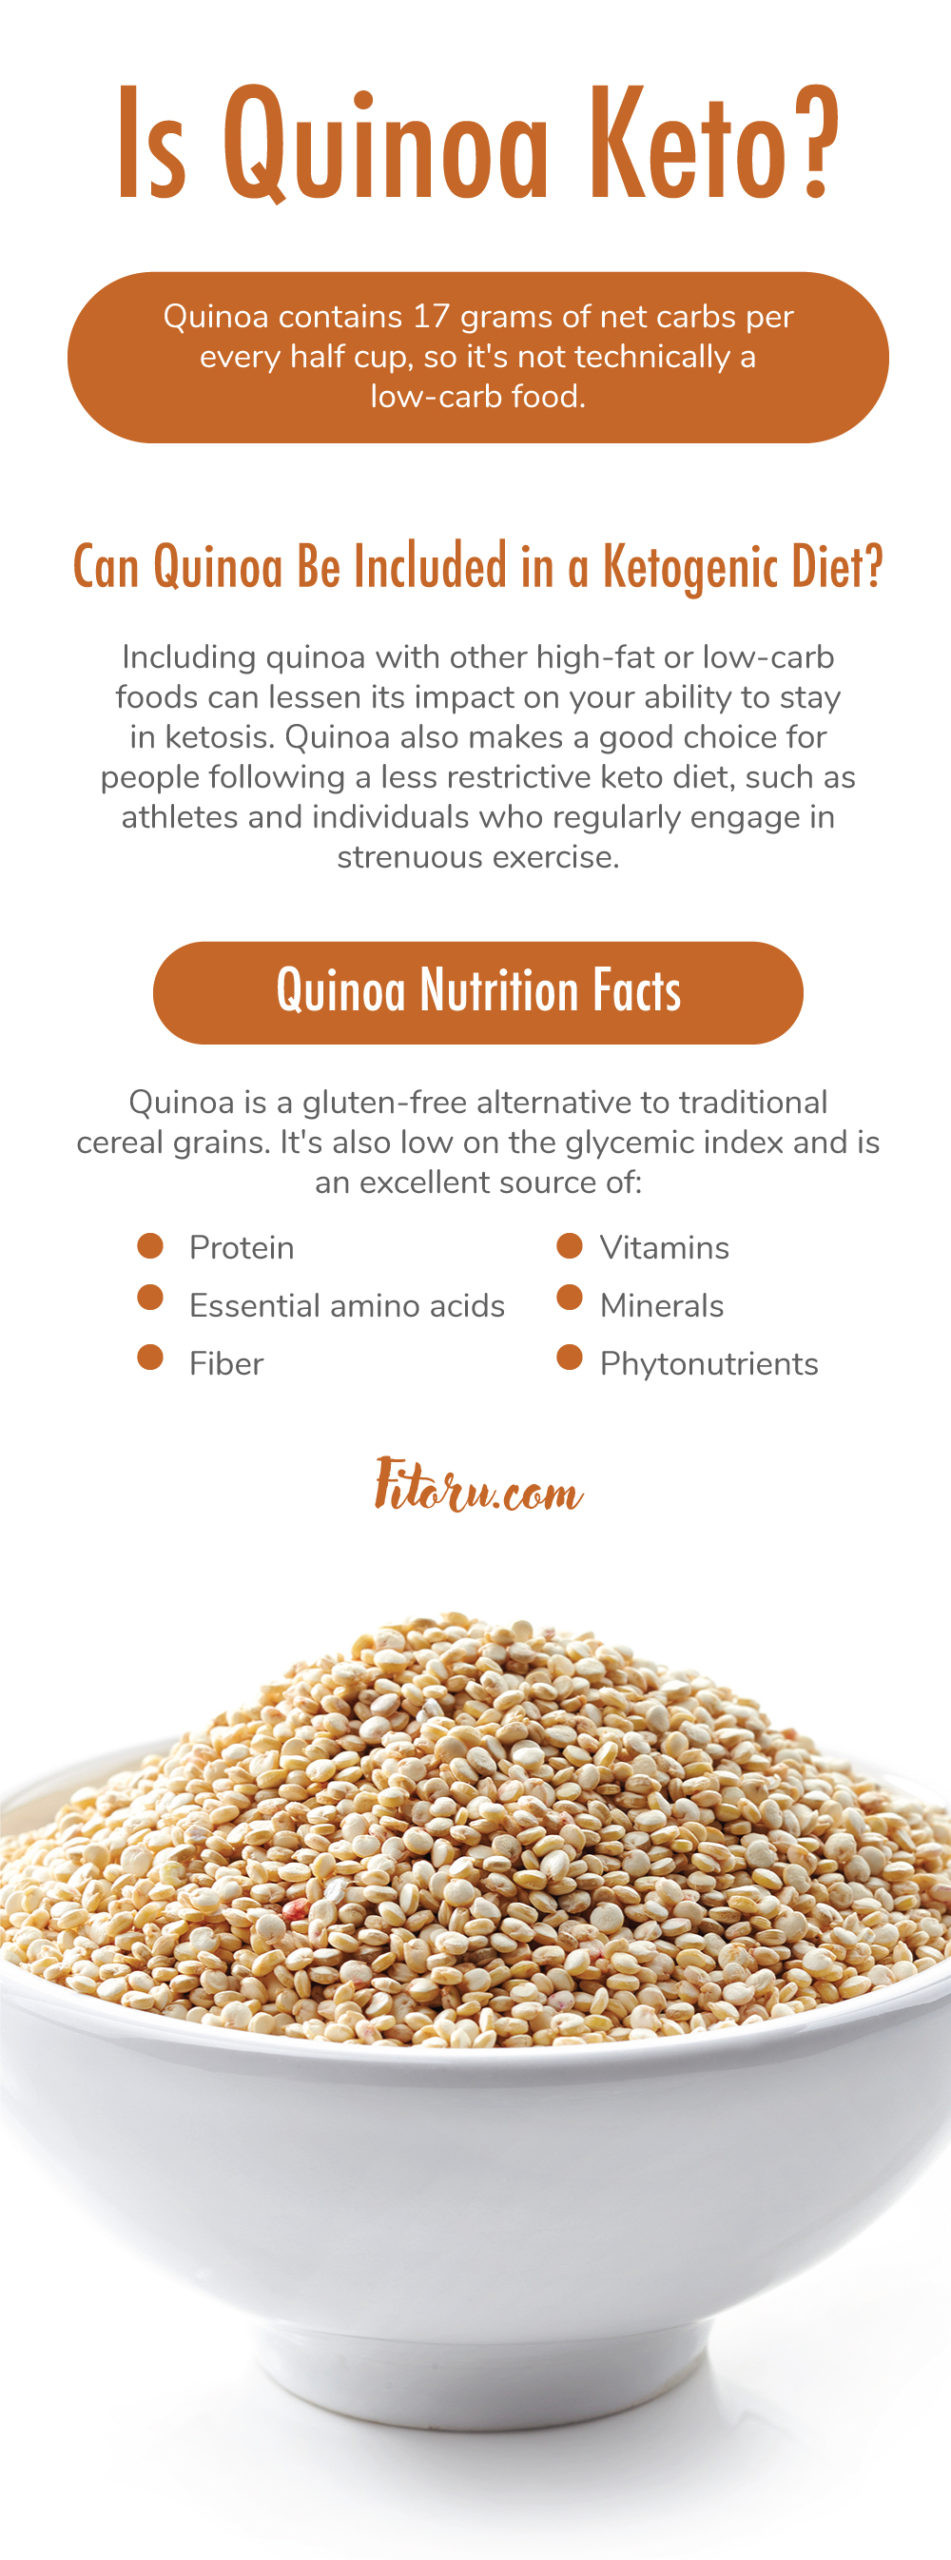 Keto Diet Quinoa
 Is Quinoa Keto Everything You Need to Know About Quinoa